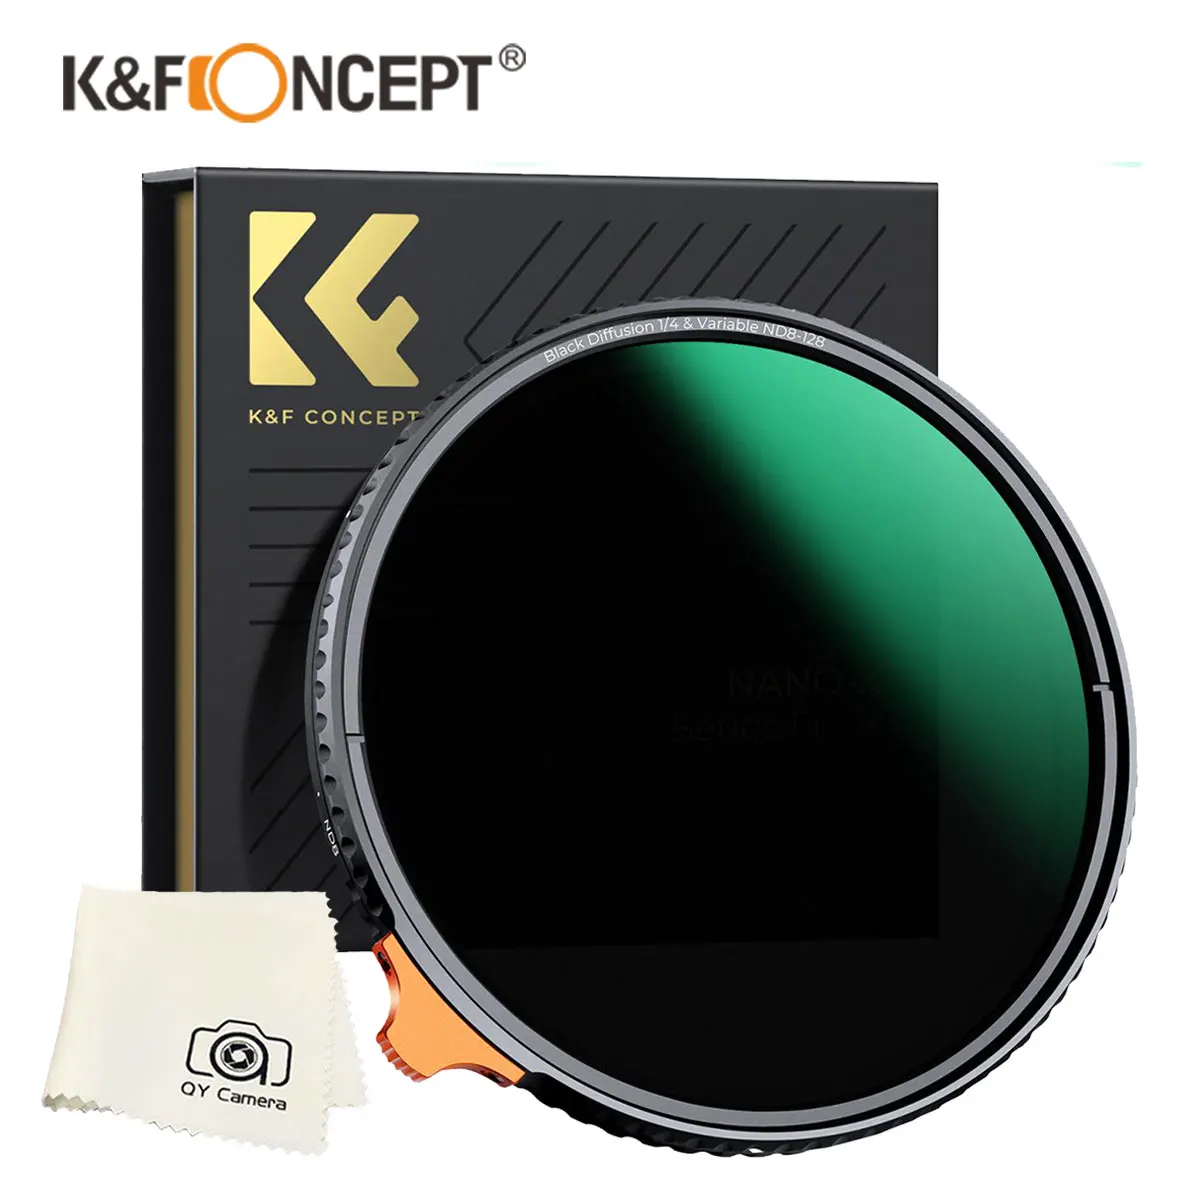 

K&F kf Concept 2in1 2 in 1 Black Pro Mist Diffusion 1/4+ND8-128 Variable Adjustable Lens Lenses Filter 67mm 72mm Nano X Series